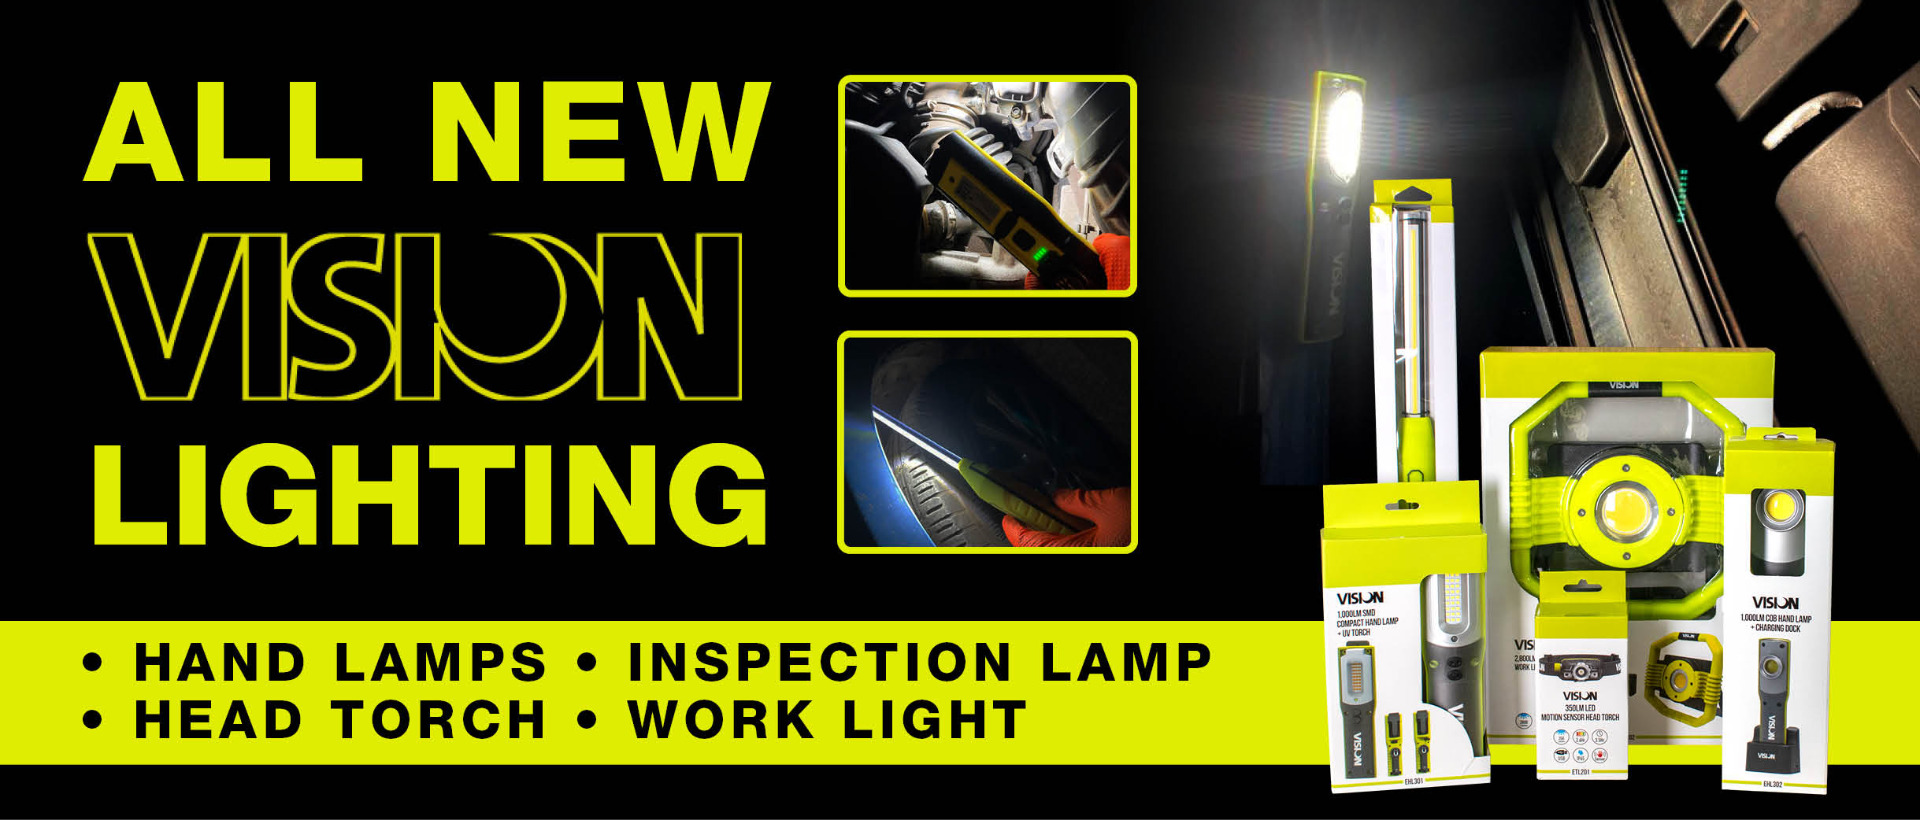 ALL NEW VISION LIGHTING - Hand Lamps - Inspection Lamp - Head Torch - Work Light